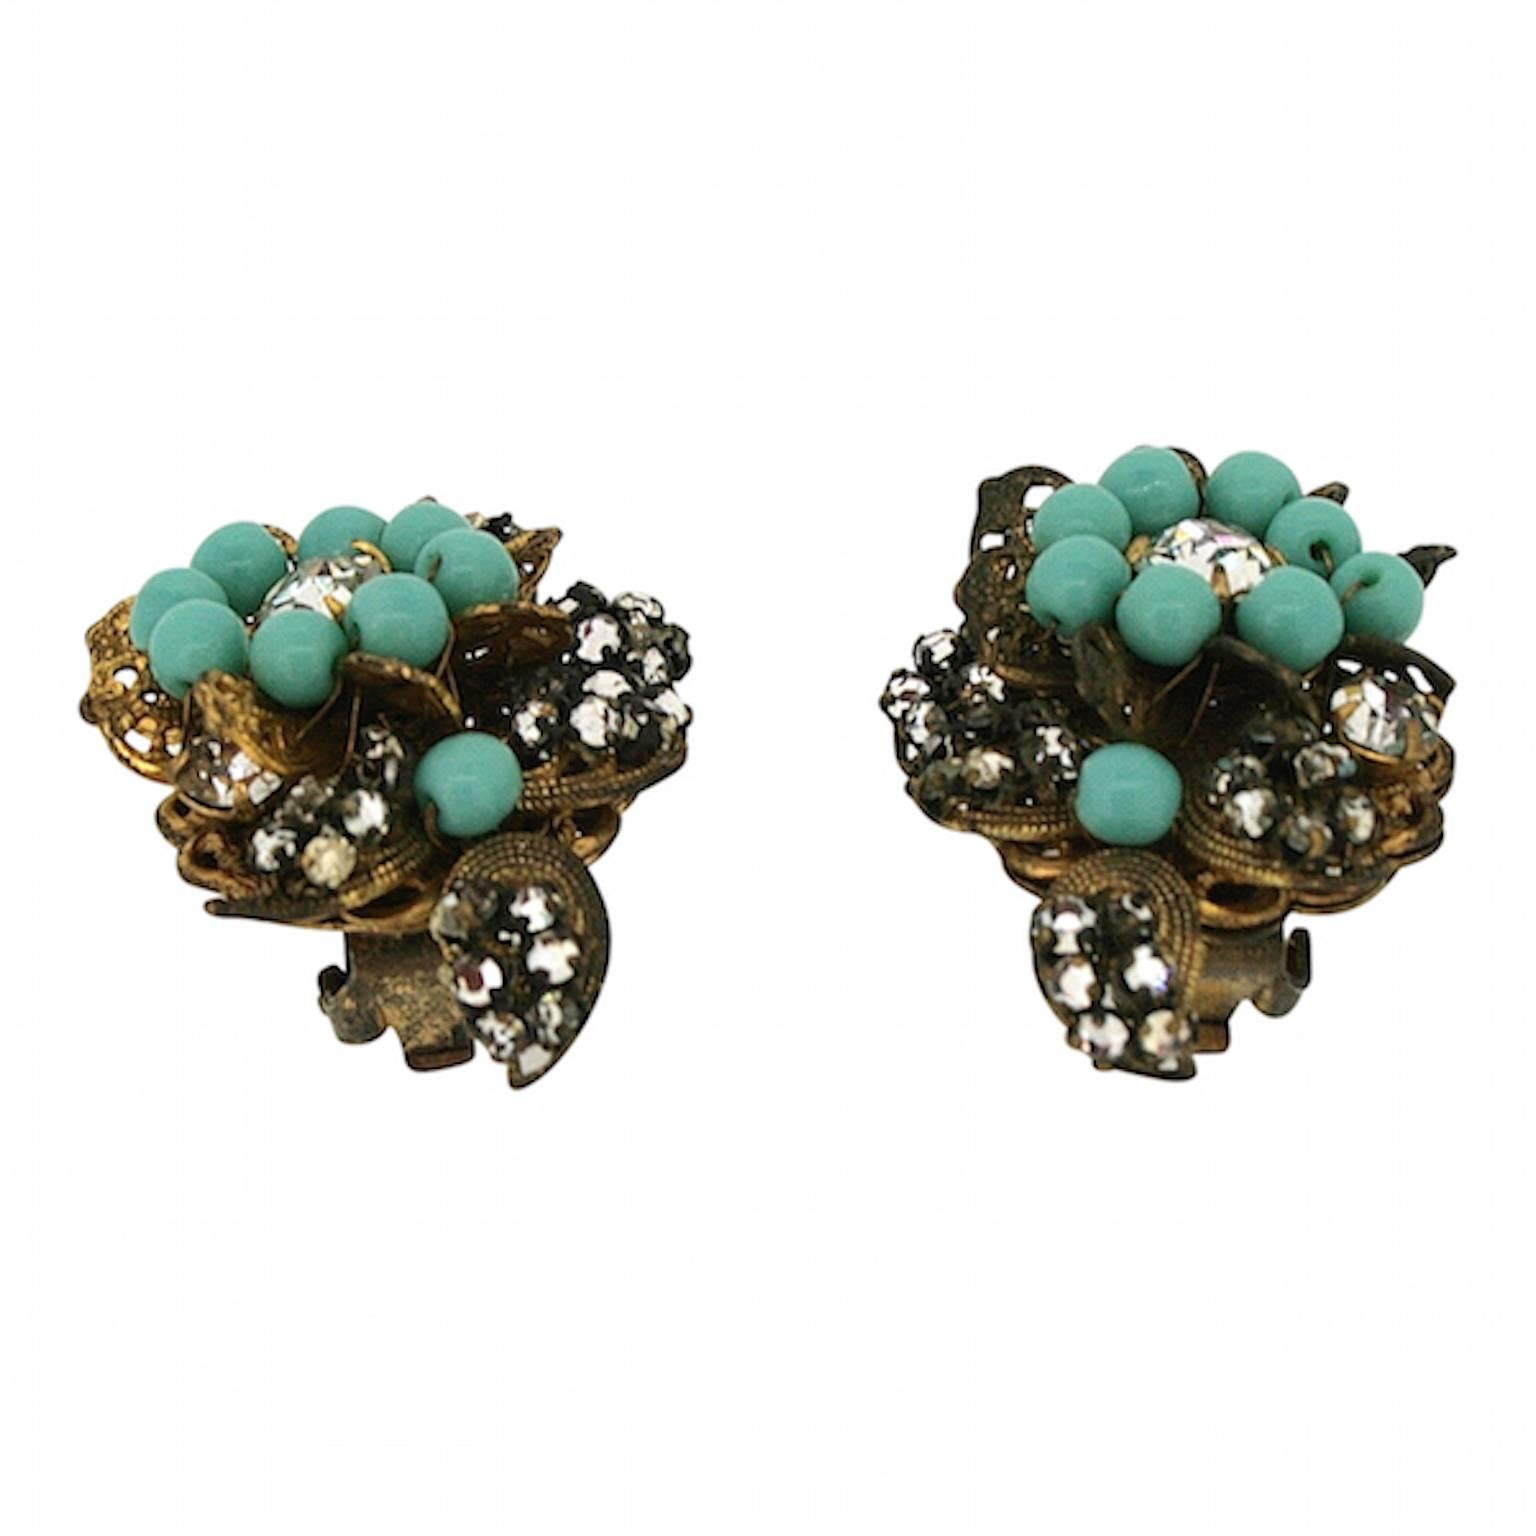 These remarkable clip on earrings are a beautiful example of the costume jewellery produced in the 1950s by the Miriam Haskell company. 
Condition Report:
Good - Some wear to the gilt metal surface of one earring consistent with age and use. This